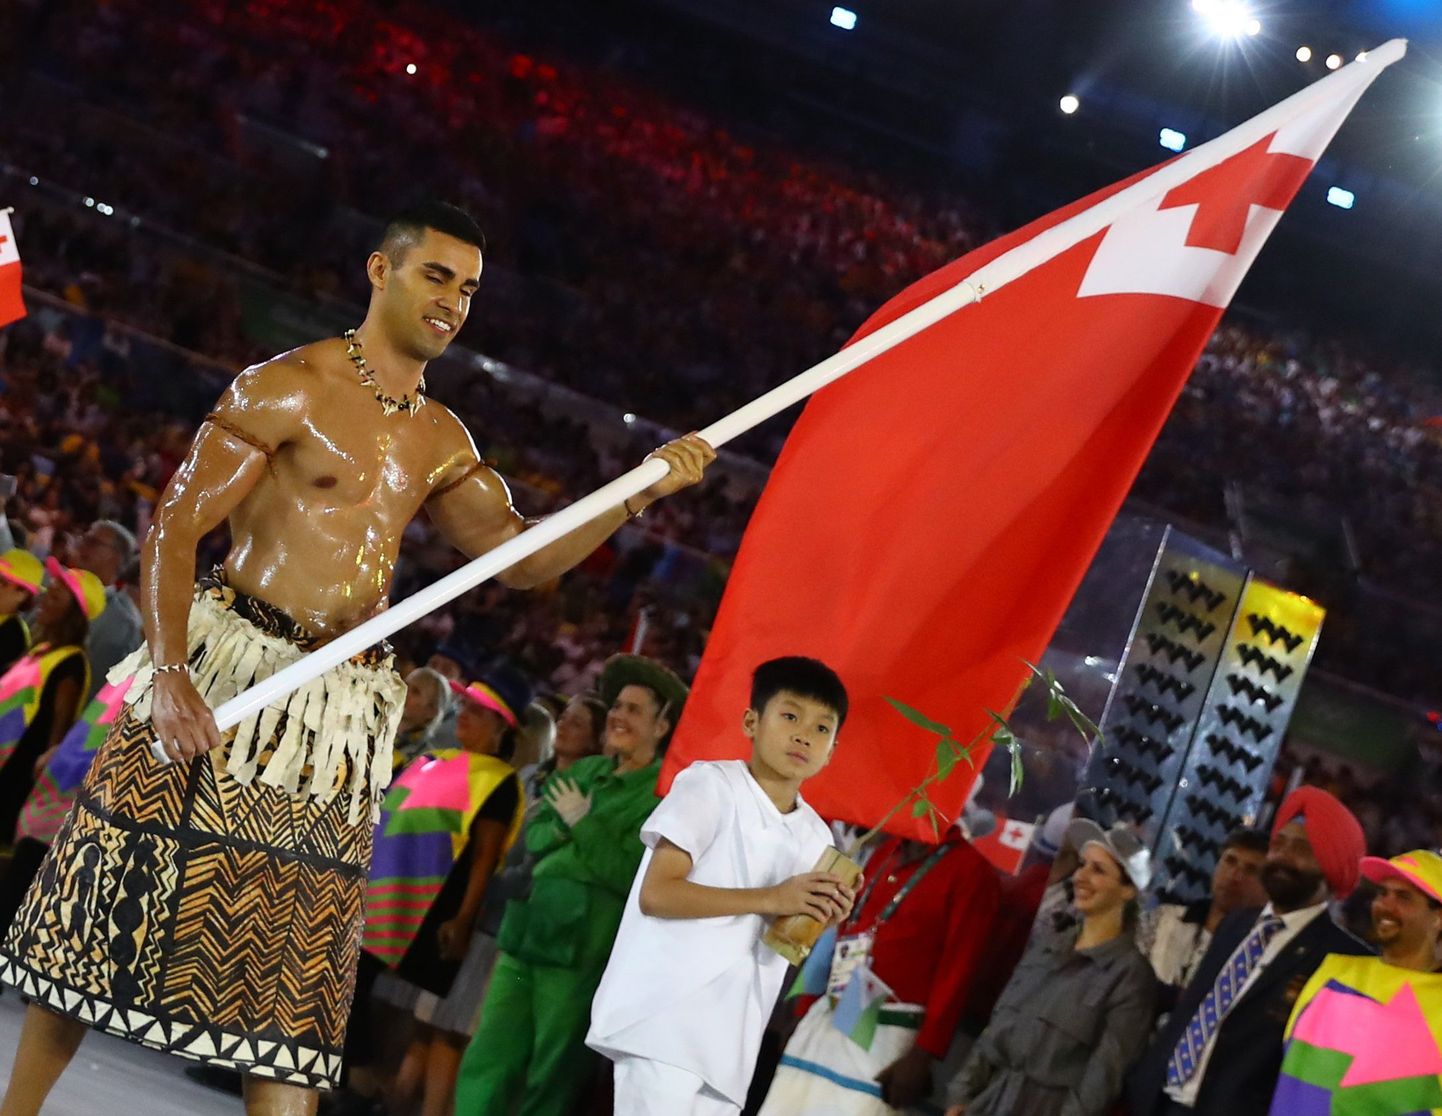 2016 Rio Olympics - Opening Ceremony - Maracana - Rio de Janeiro, Brazil - 05/08/2016. Flagbearer Pita Nikolas Taufatofua (TGA) of Tonga leads his contingent during the opening ceremony.    REUTERS/Kai Pfaffenbach  FOR EDITORIAL USE ONLY. NOT FOR SALE FOR MARKETING OR ADVERTISING CAMPAIGNS.